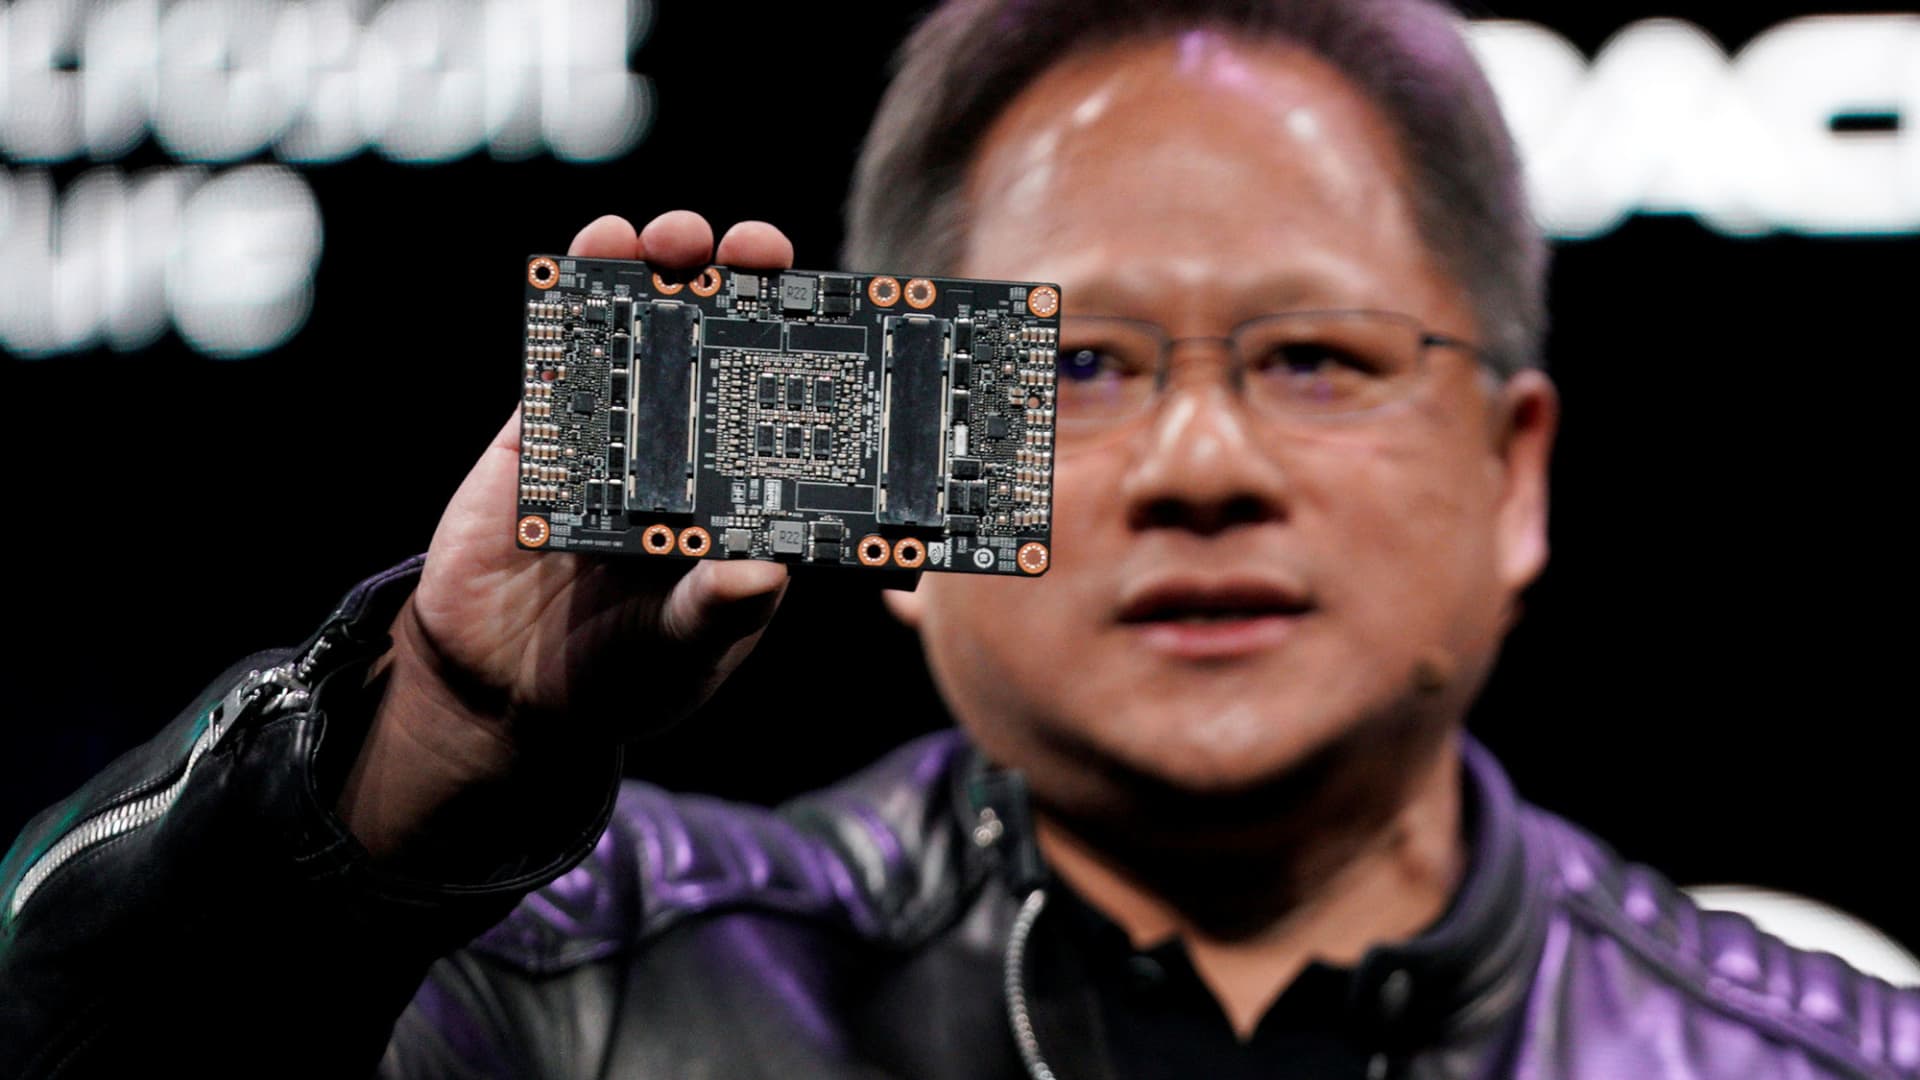 Nvidia's blowout earnings lift AMD while other chipmakers like Intel fall